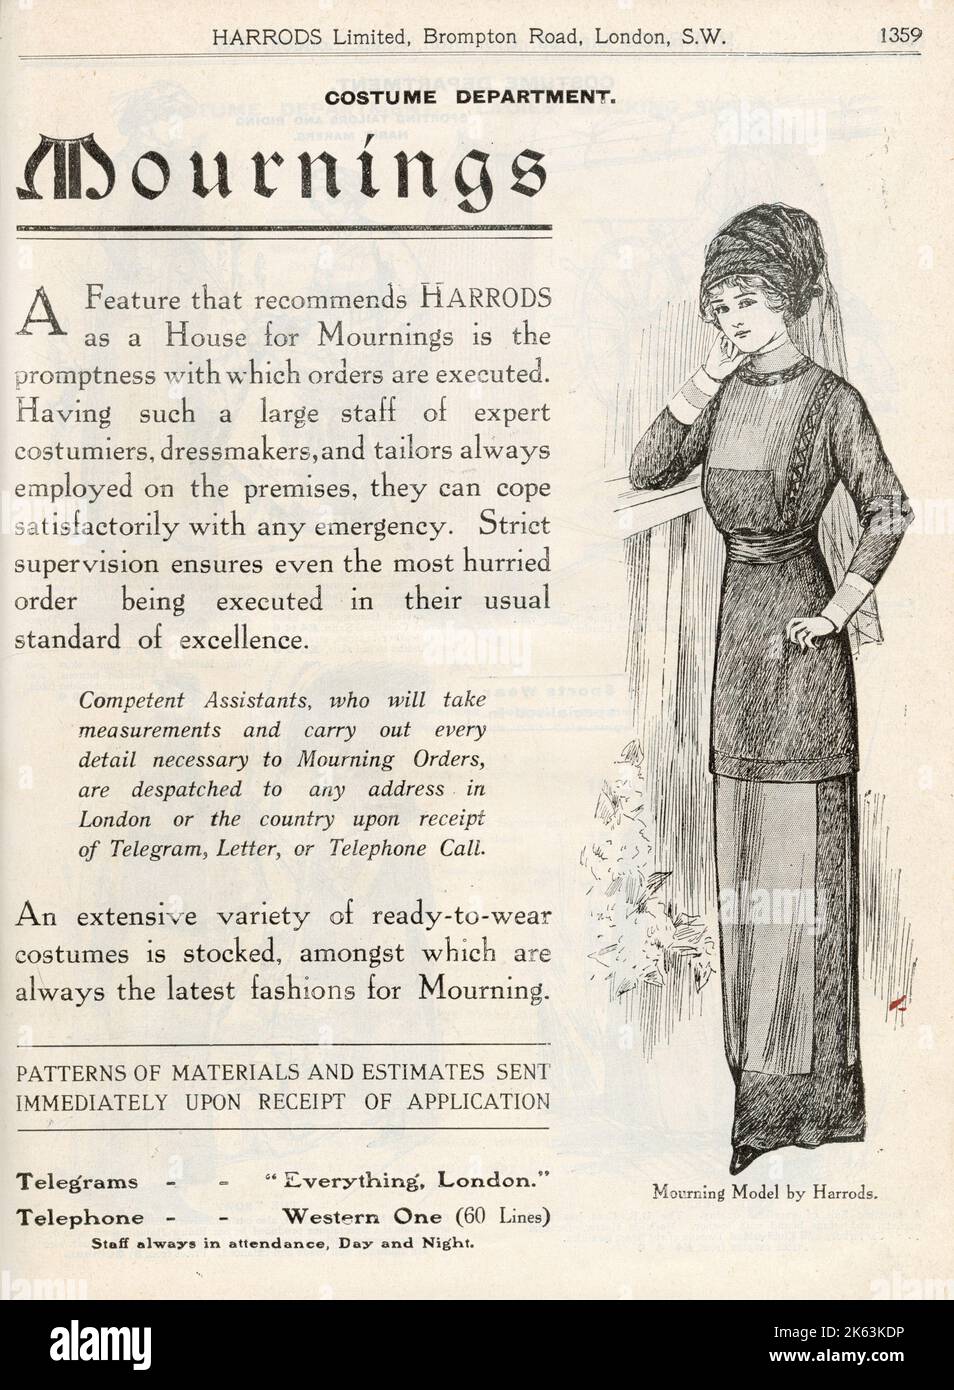 Harrods mail order service for mourning costumes. Stock Photo